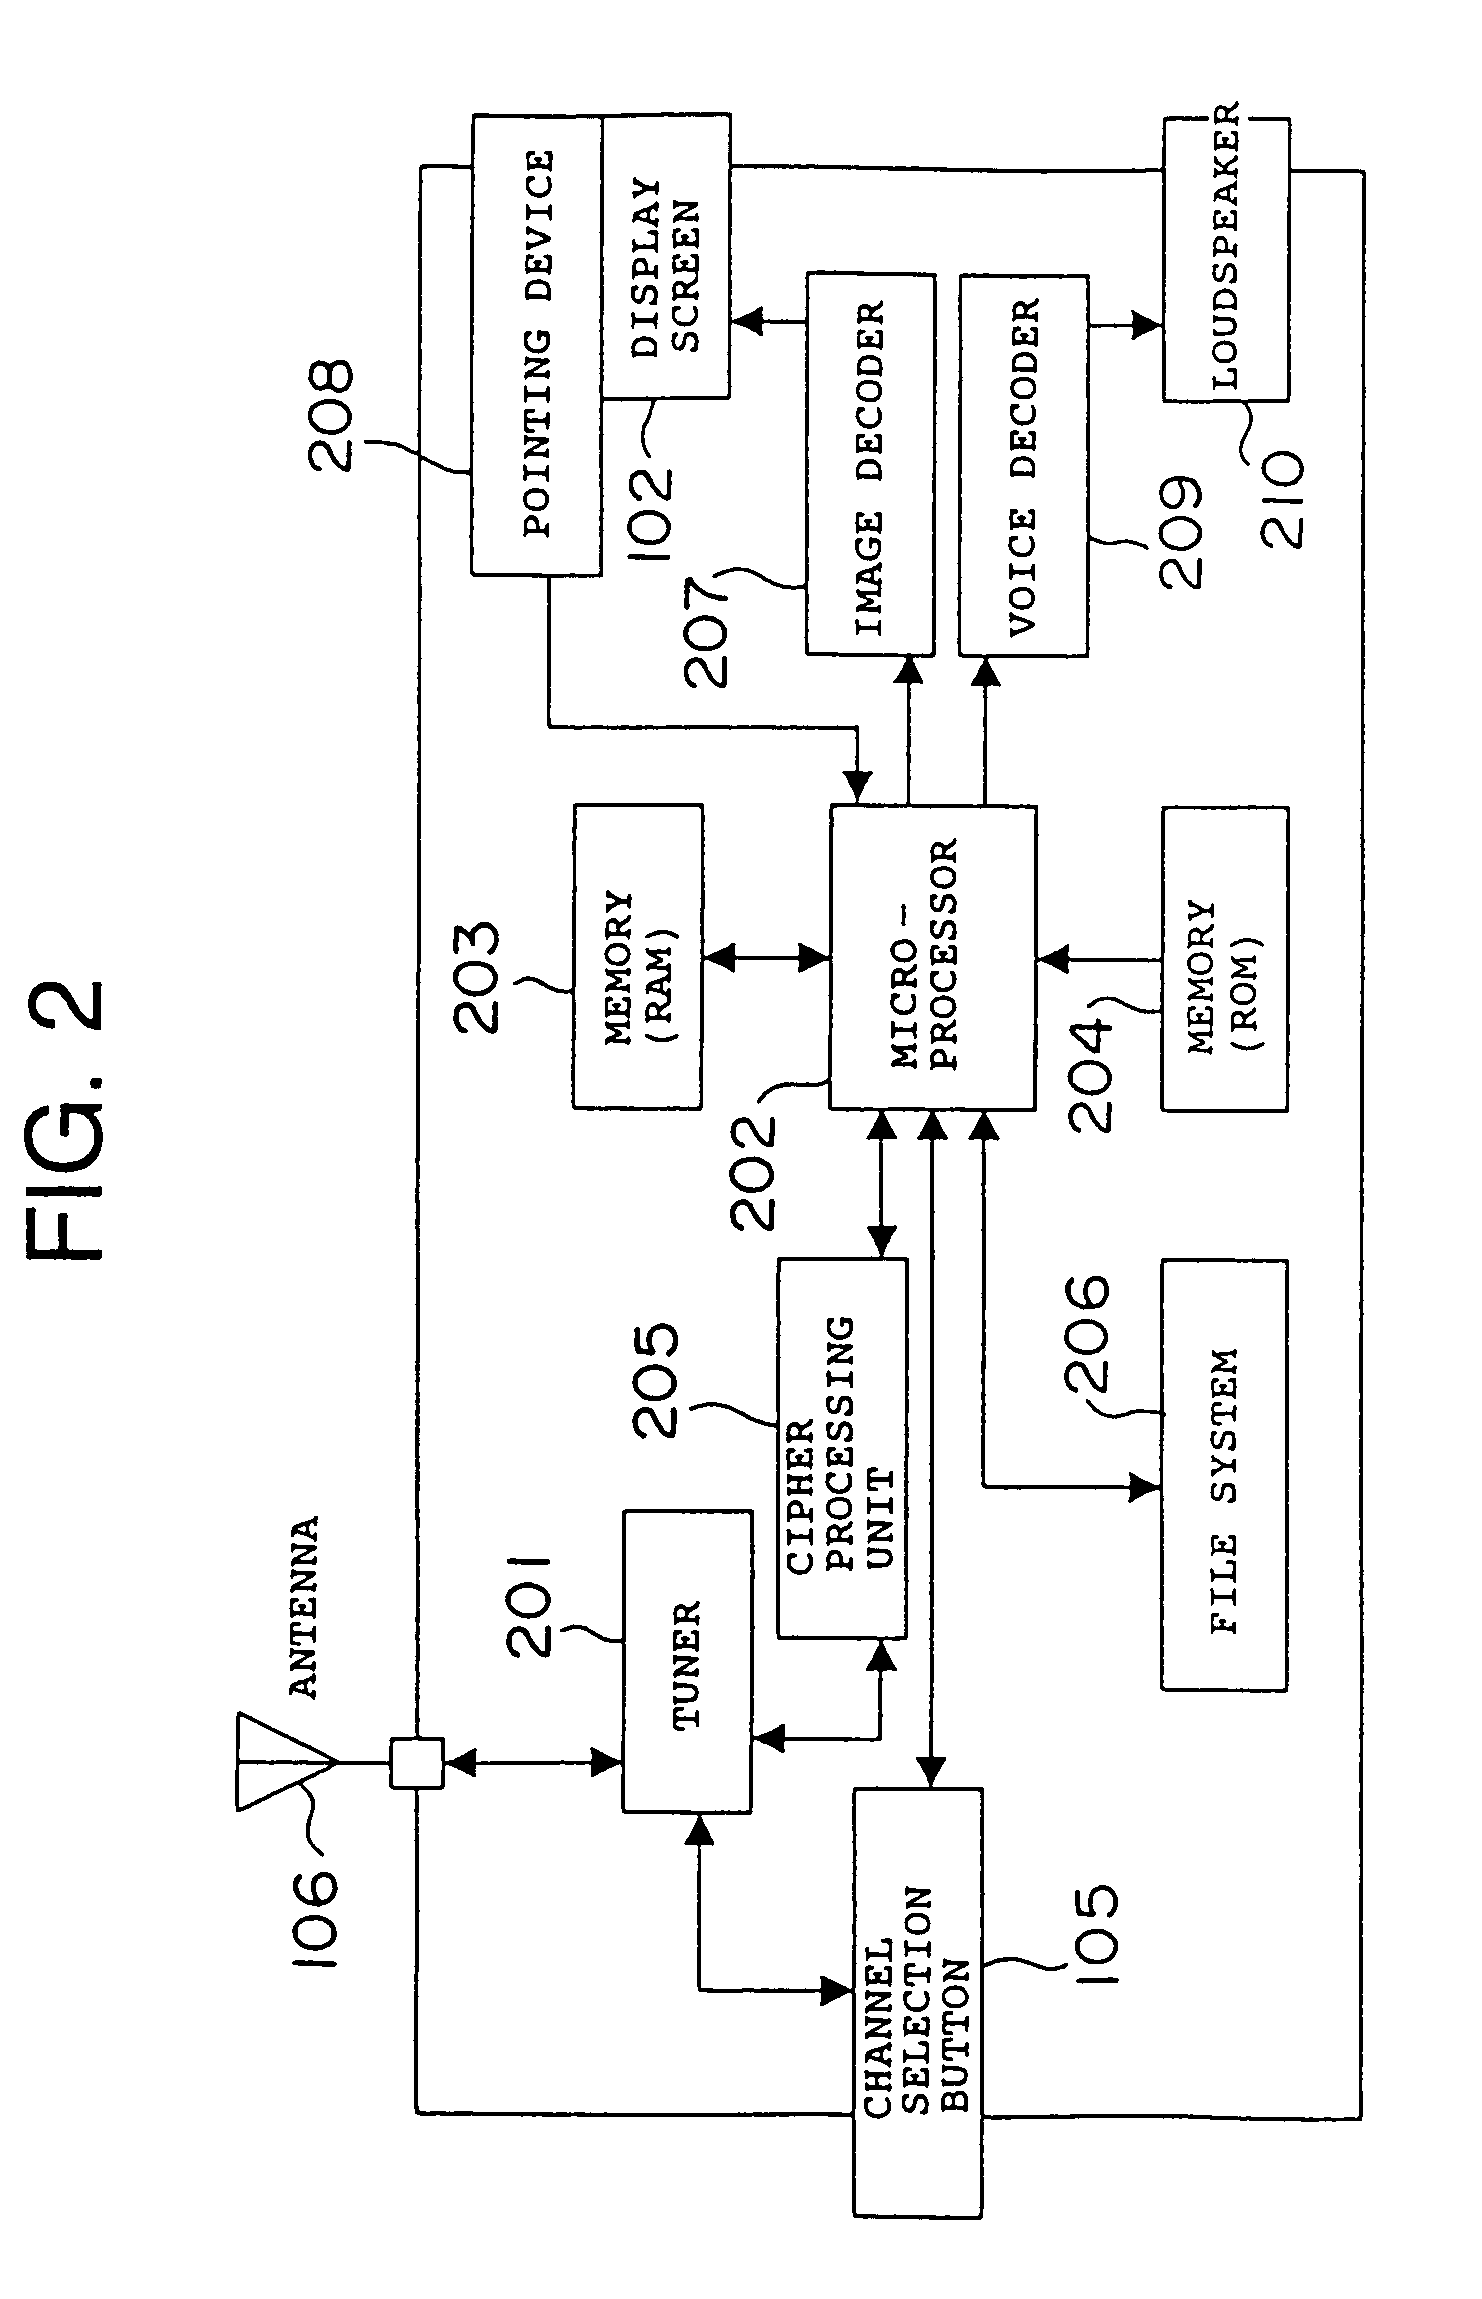 Local area information terminal device